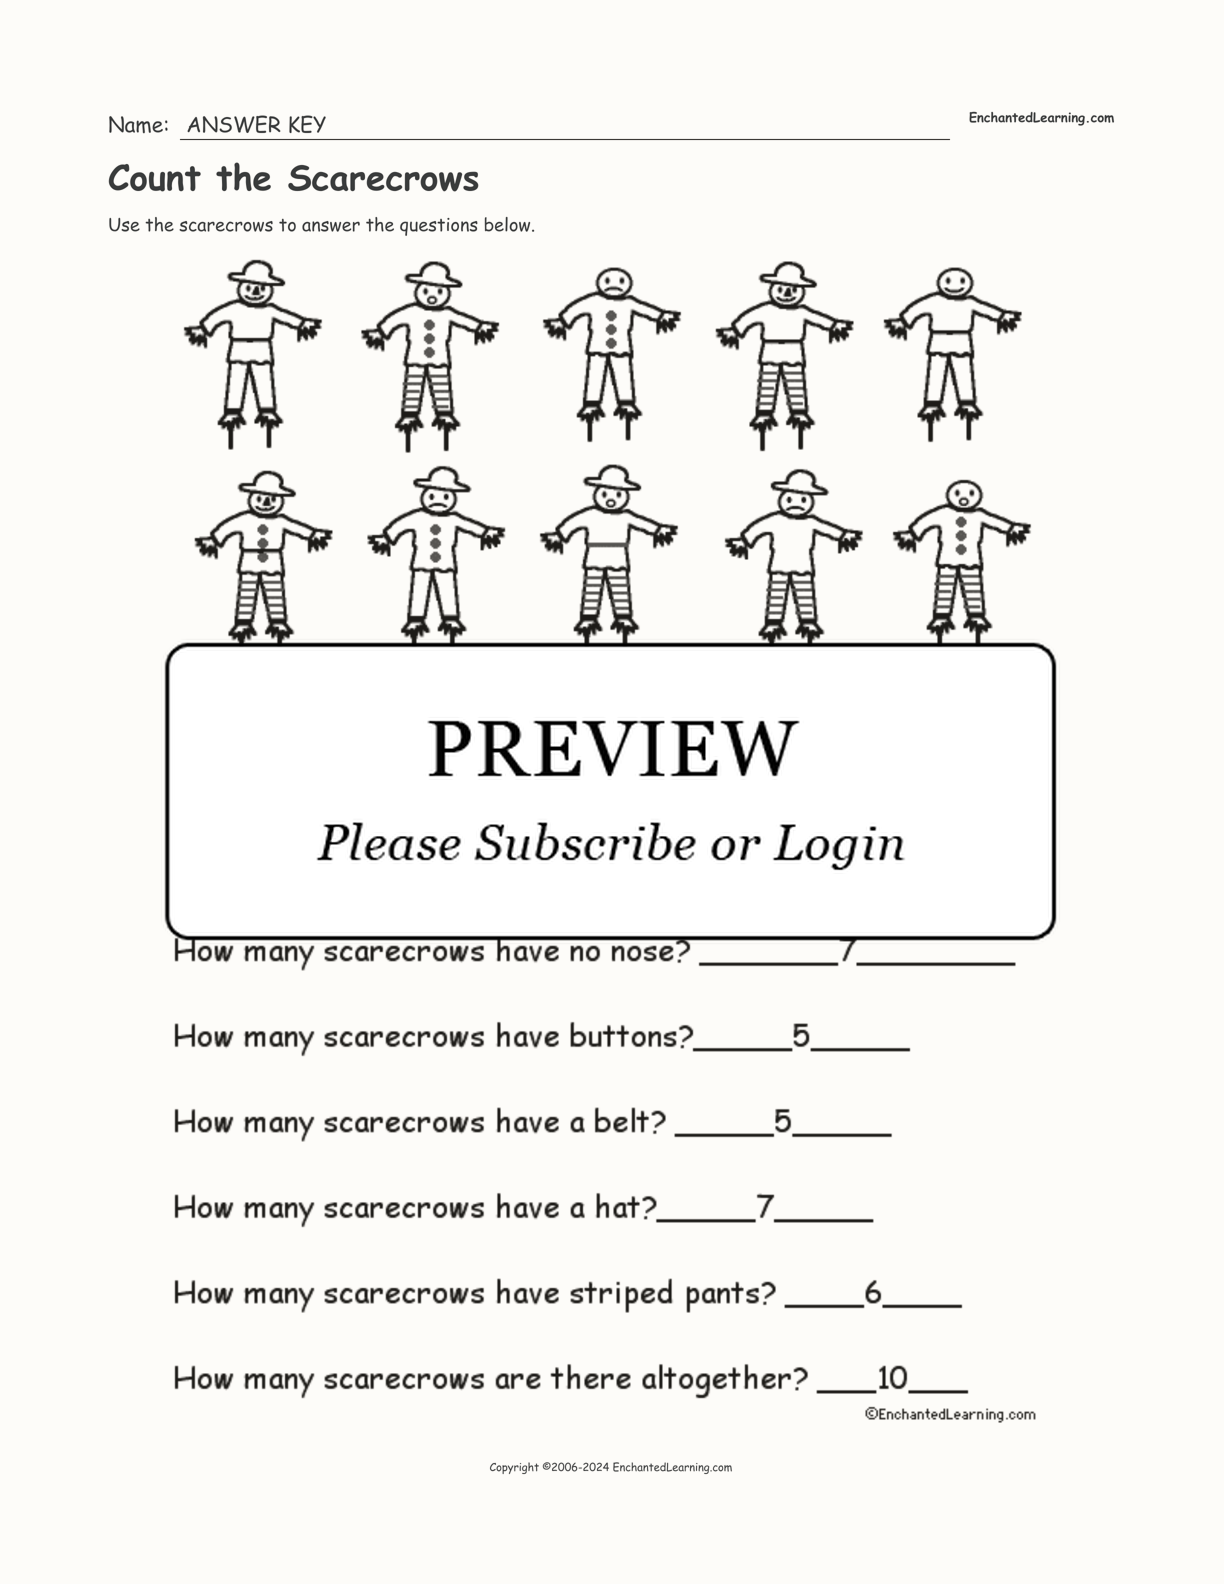 Count the Scarecrows interactive worksheet page 2